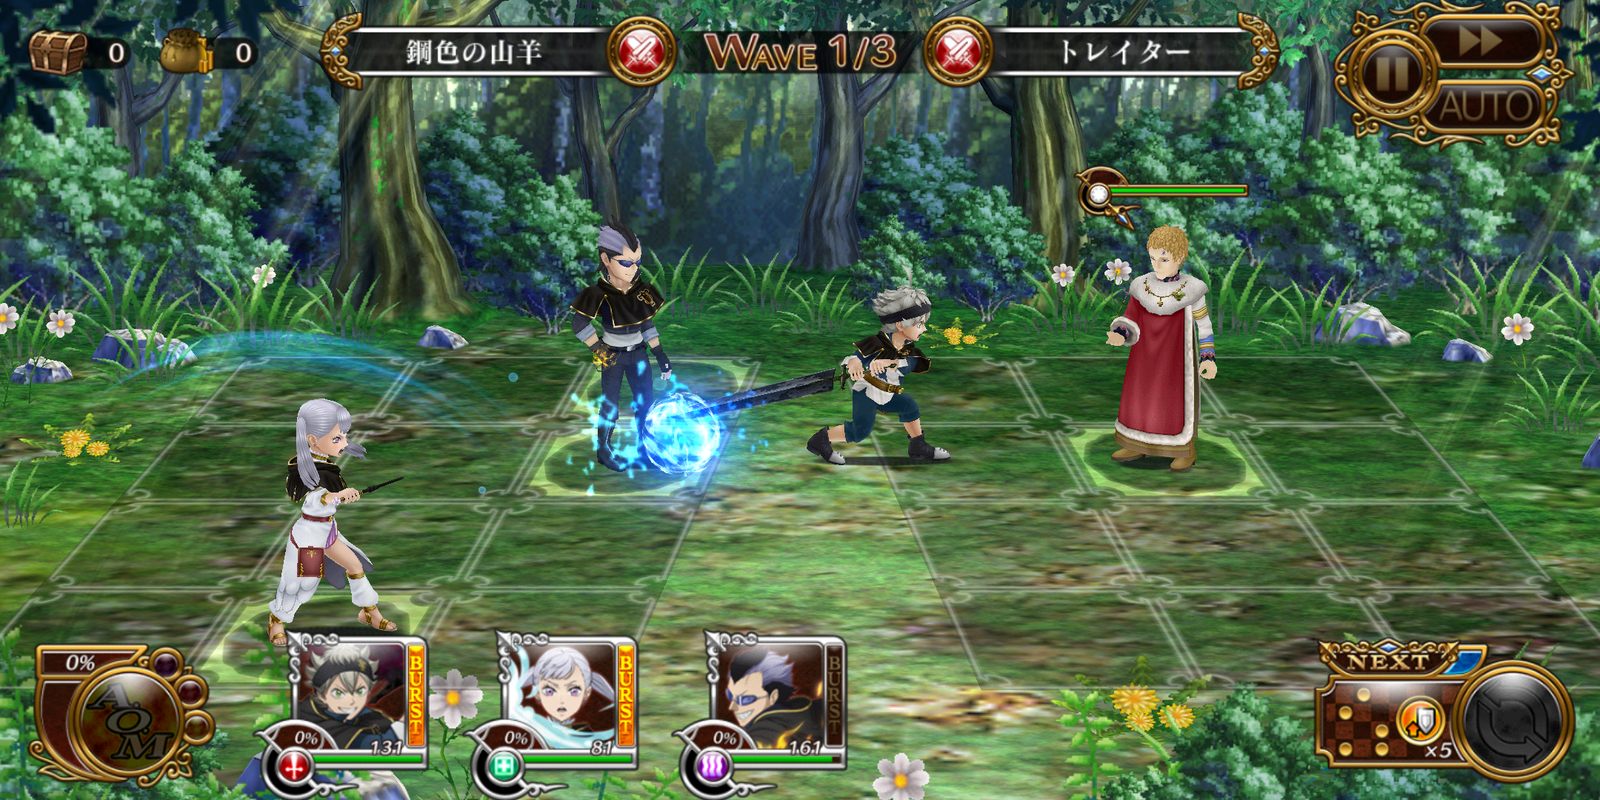 Black Clover: Infinite Knights (JP) 1.5.4 APK for Android Screenshot 4